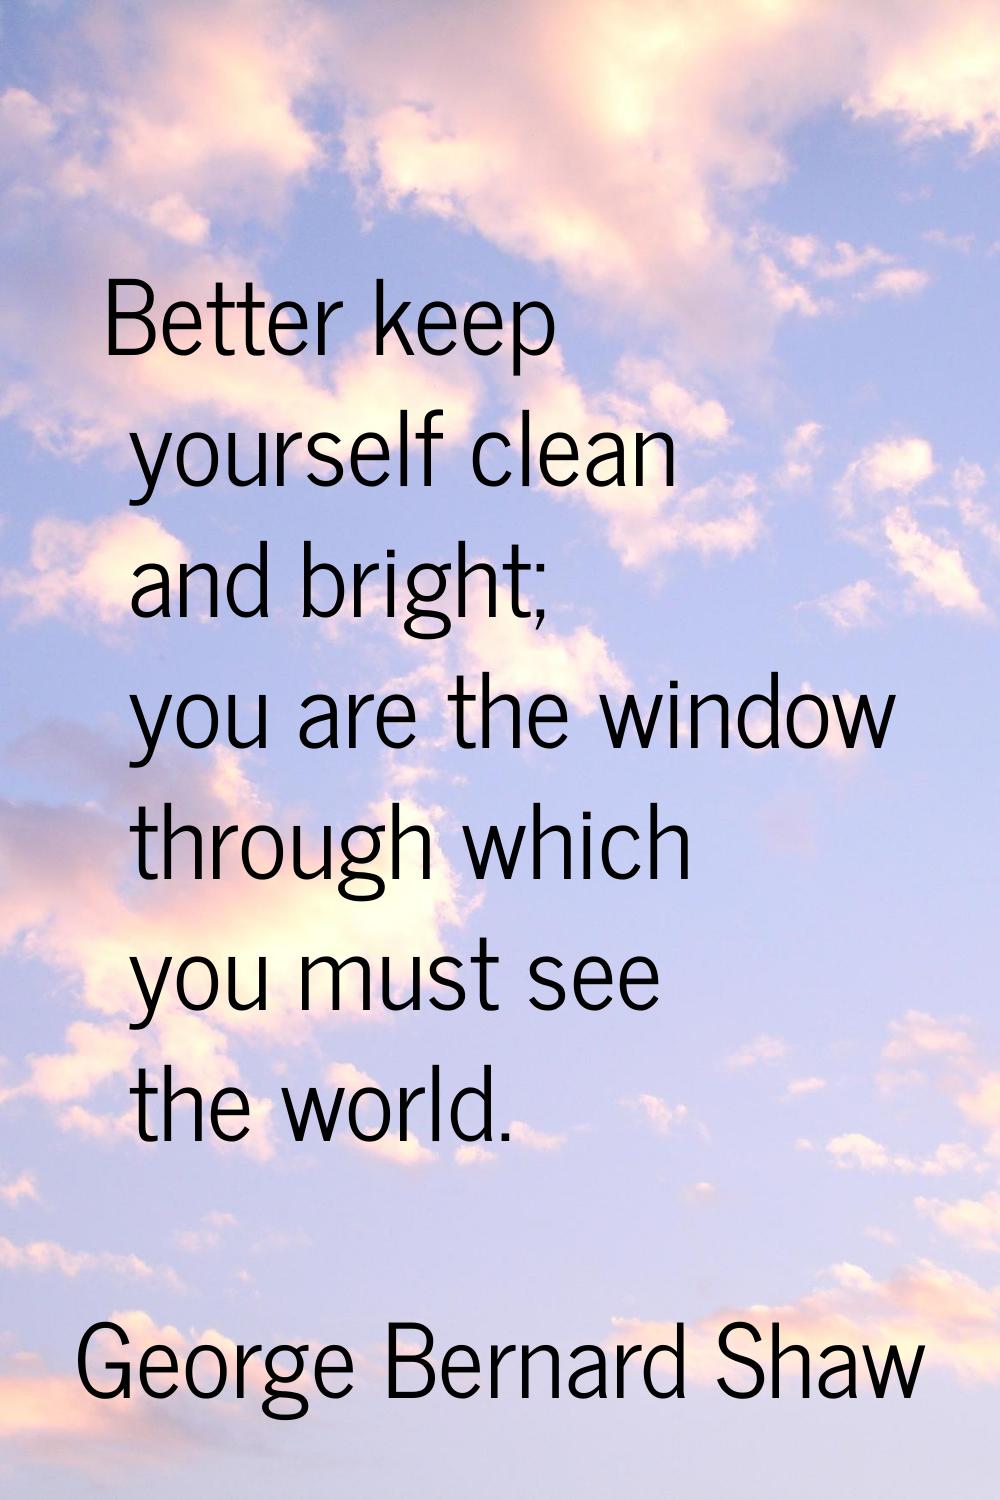 Better keep yourself clean and bright; you are the window through which you must see the world.